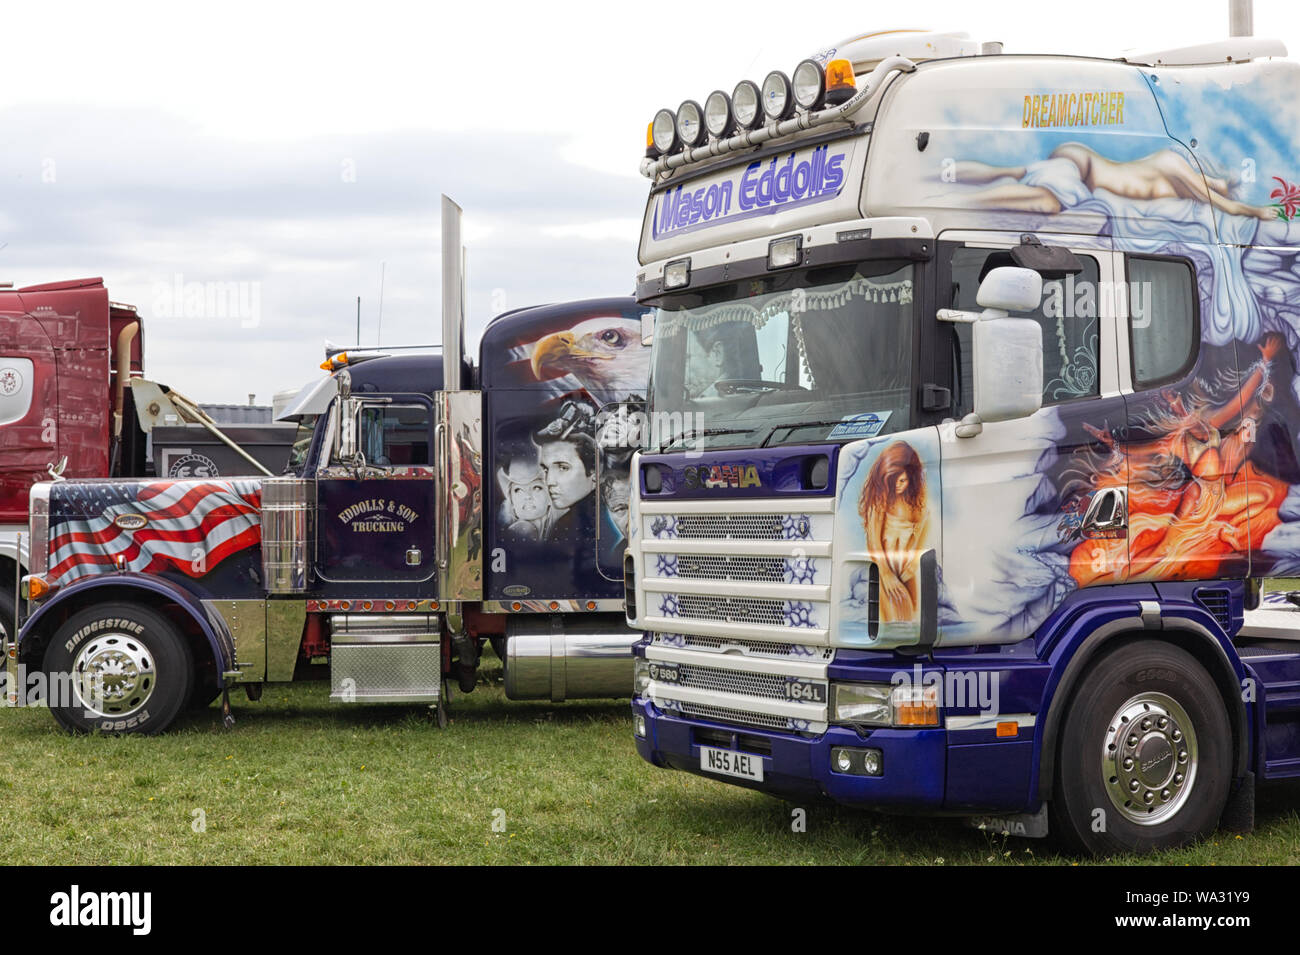 Scania and American spray painted trucks Stock Photo